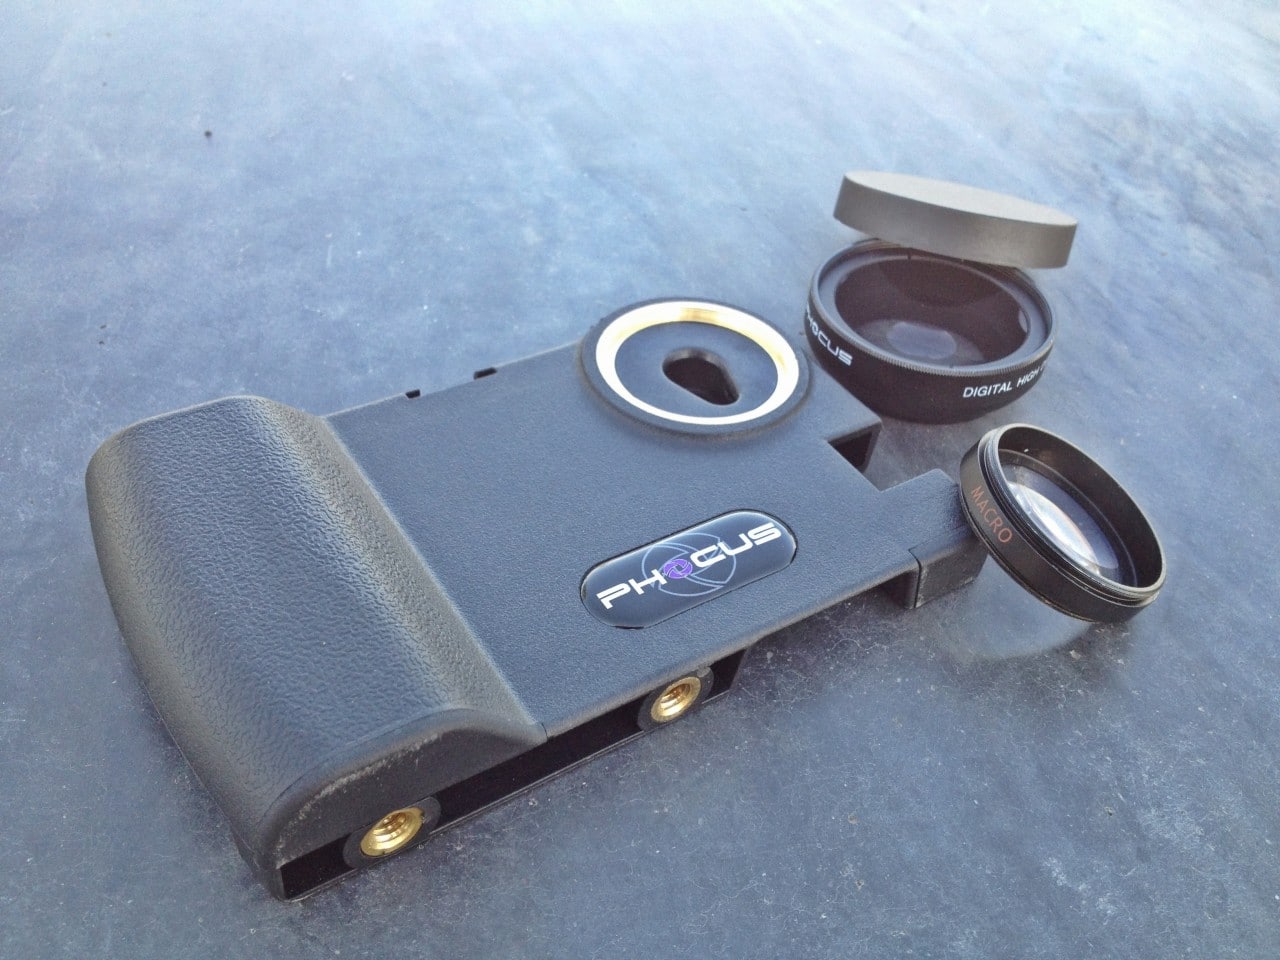 Phocus Case Allows DSLR Lenses To Be Used With Your iPhone